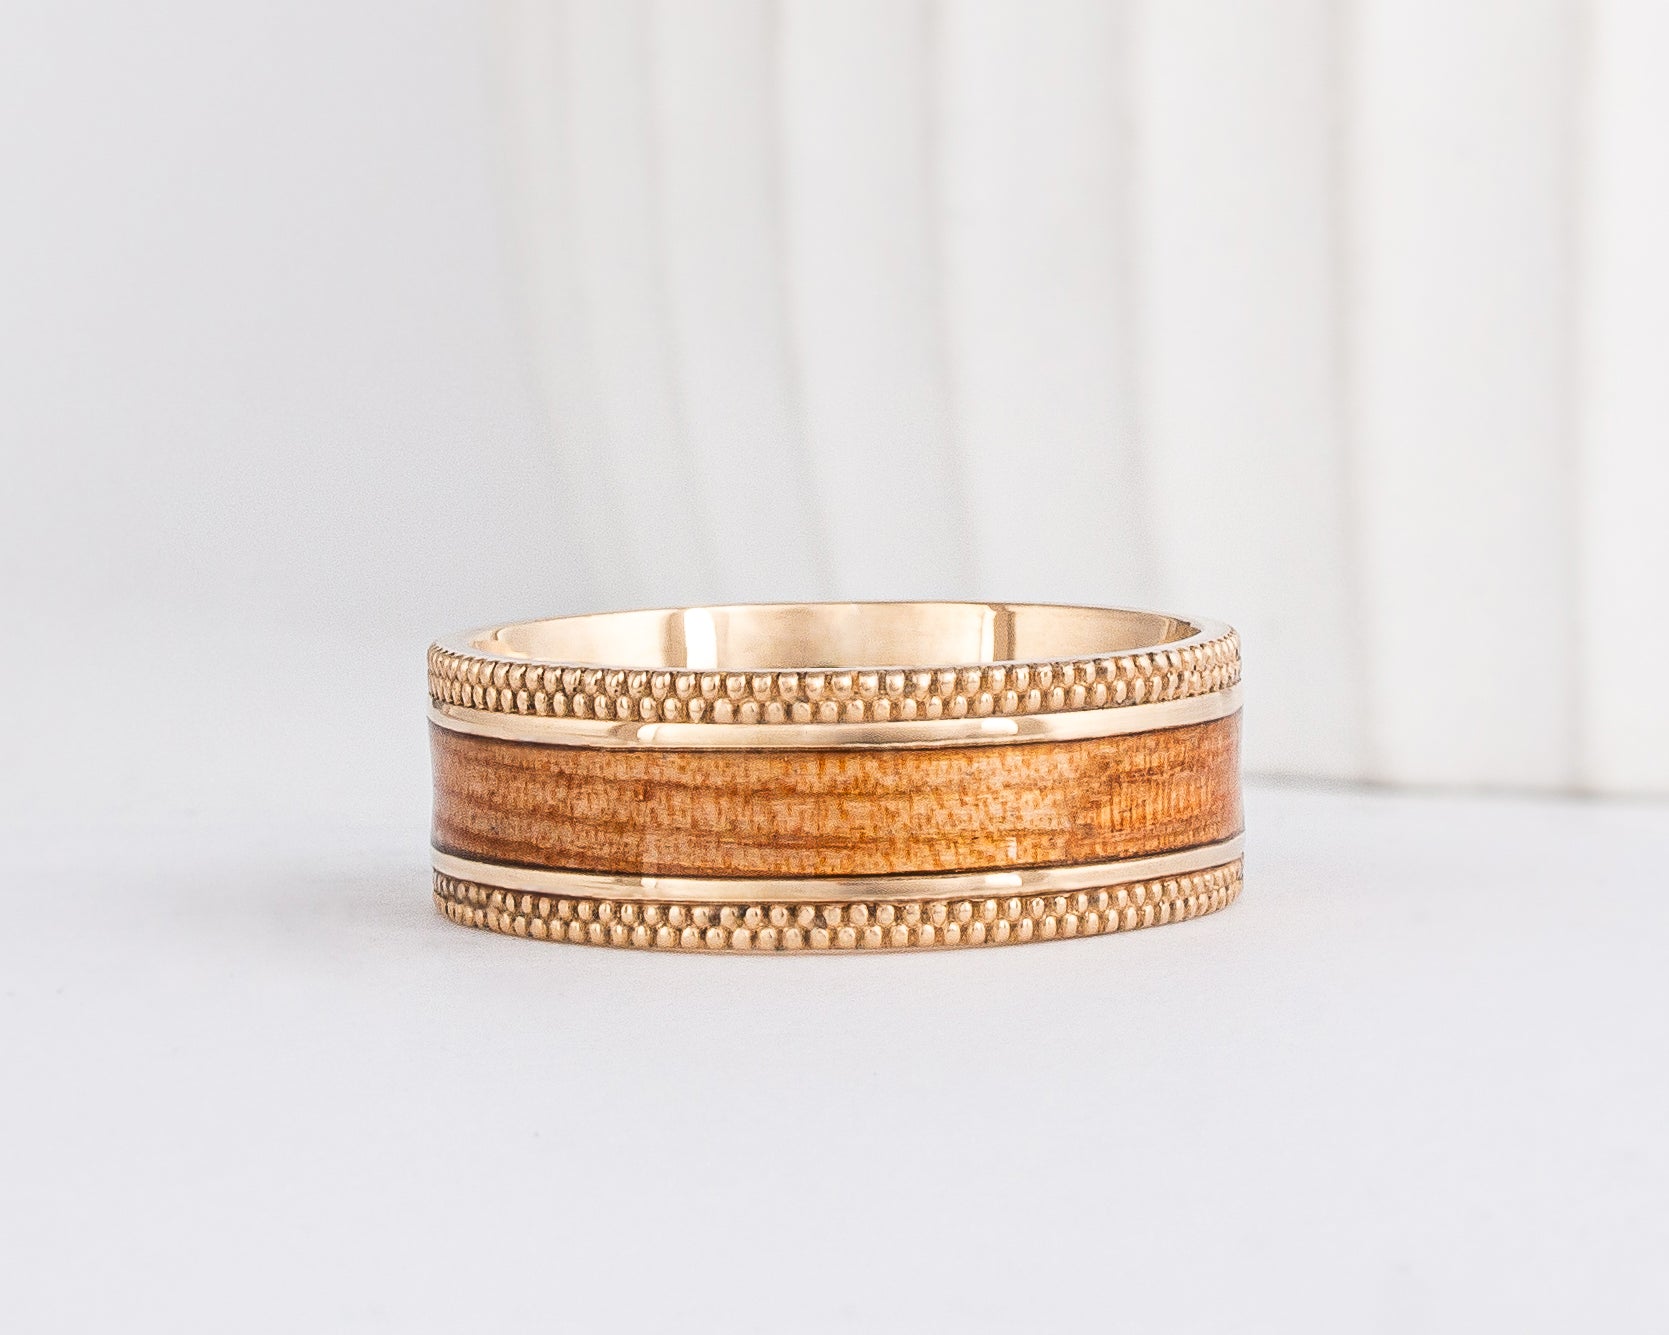 a wide mens wood wedding ring is made from yellow gold and has edges with a double milgrain pattern. The center of the ring is two thin borders of gold on either side of an american elm wood inlay